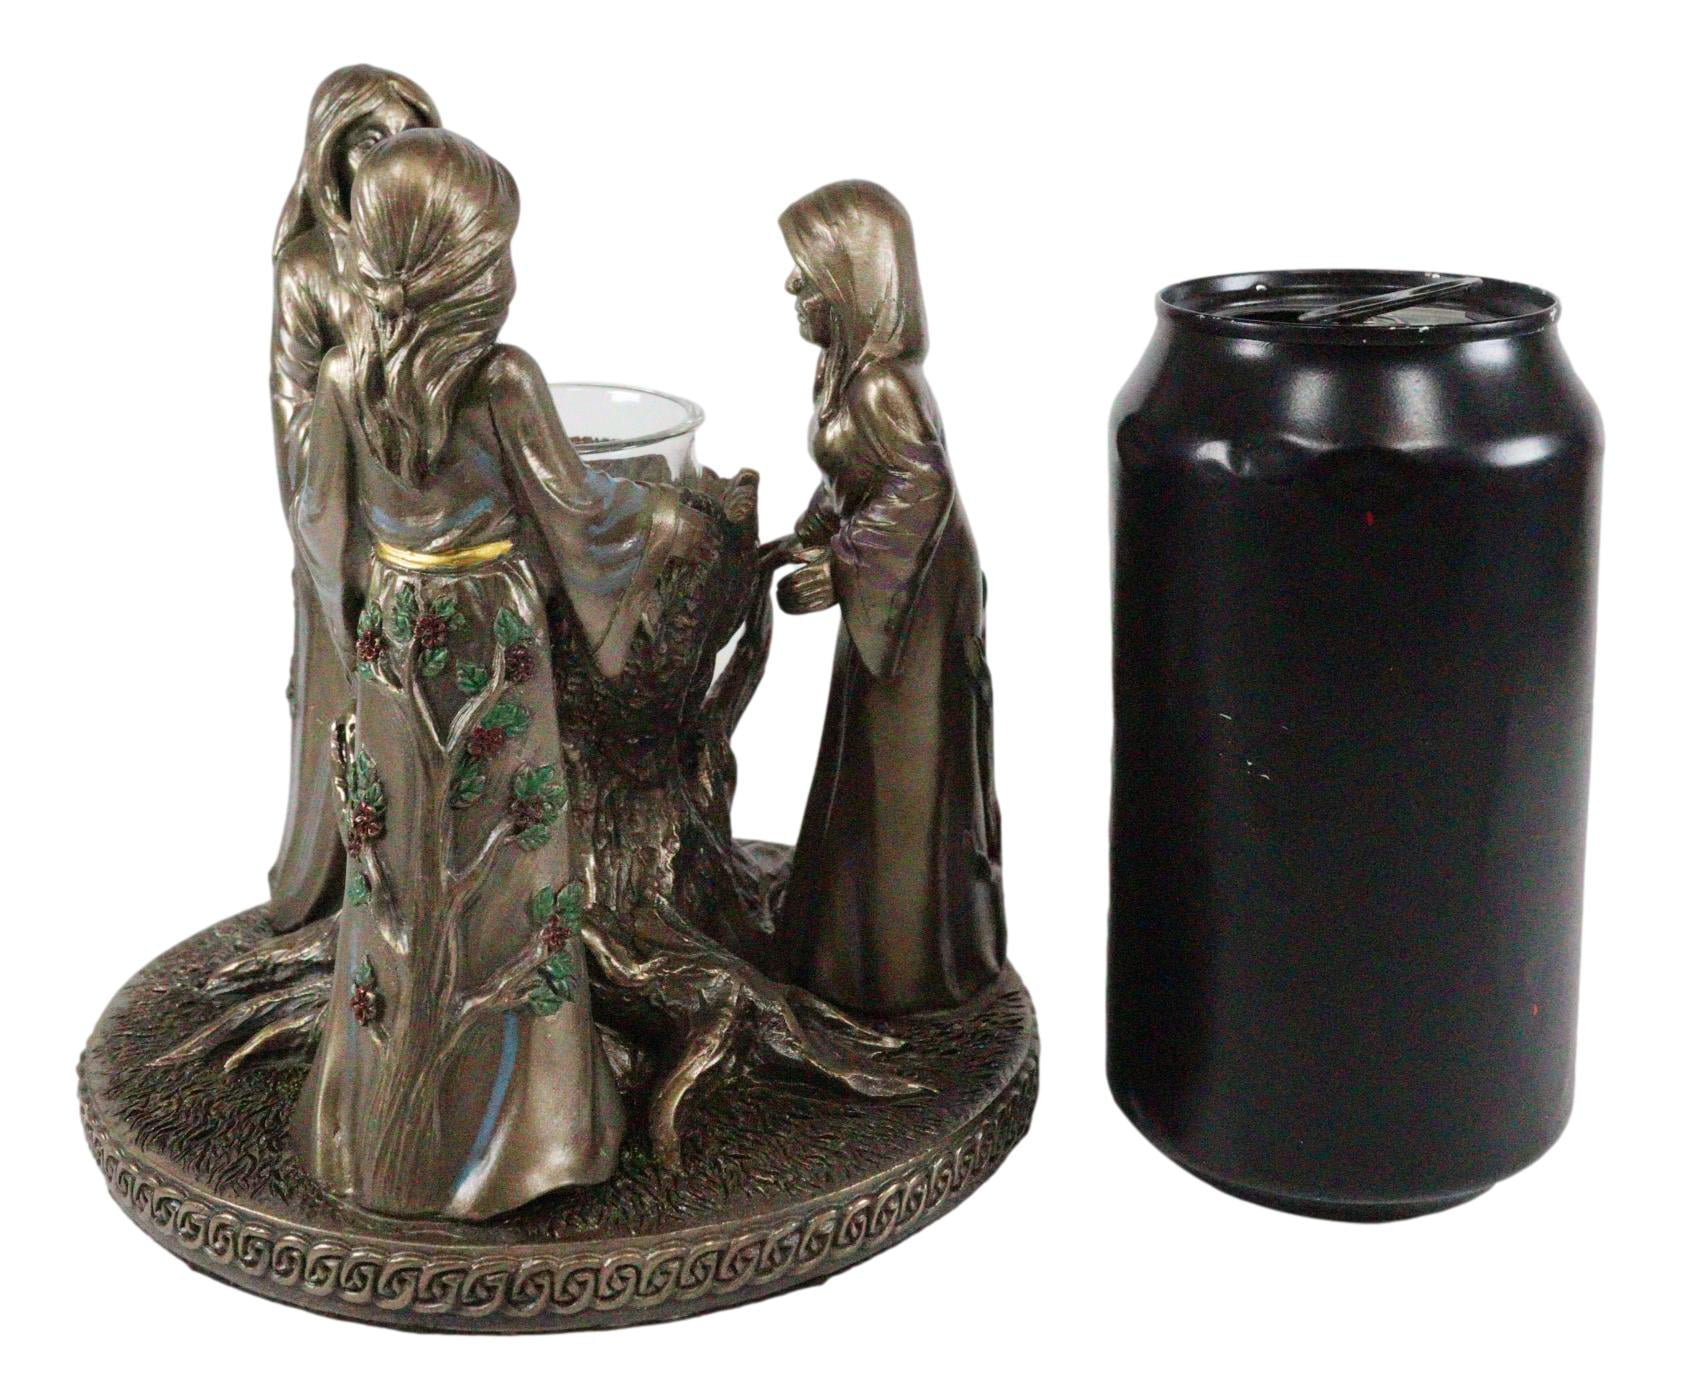 Details about   Wicca Goddess Mother Maiden Fertility Dust Plug Cell Phone Embelishment 